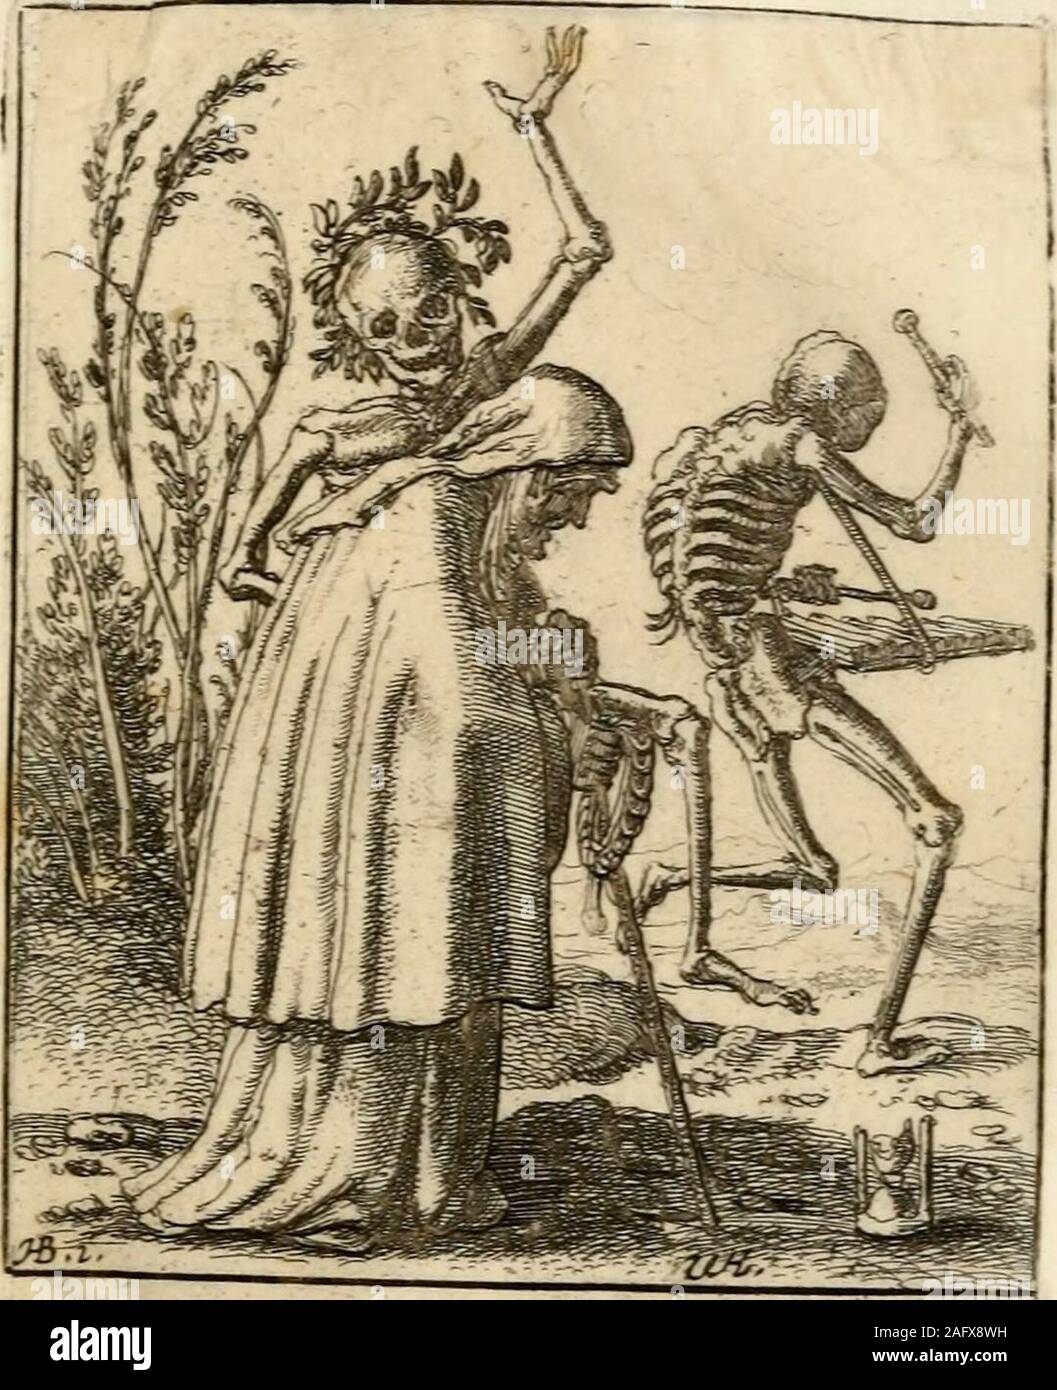 . The dance of death. 69 THE VERY OLD MAN. XXVIII. THIS is a beautiful emblem of manssecond infancy. The helpless creature, boweddown with age, appears to listen with delightto the music of a dulcimer, with which Deathbeguiles him, and eyen wishes to handle it.His conductor insidiously leads him to thegrave.  70 THE AGED WOMAN. XXIX. THE tedious pace of this old woman,who is more occupied with ji rosary composedof bones than with the music of a Deathwho precedes her, playing on the woodenpsalter or dulcimer, is discovered in the im-patience of another Death, who presses herforward with blows. Stock Photo